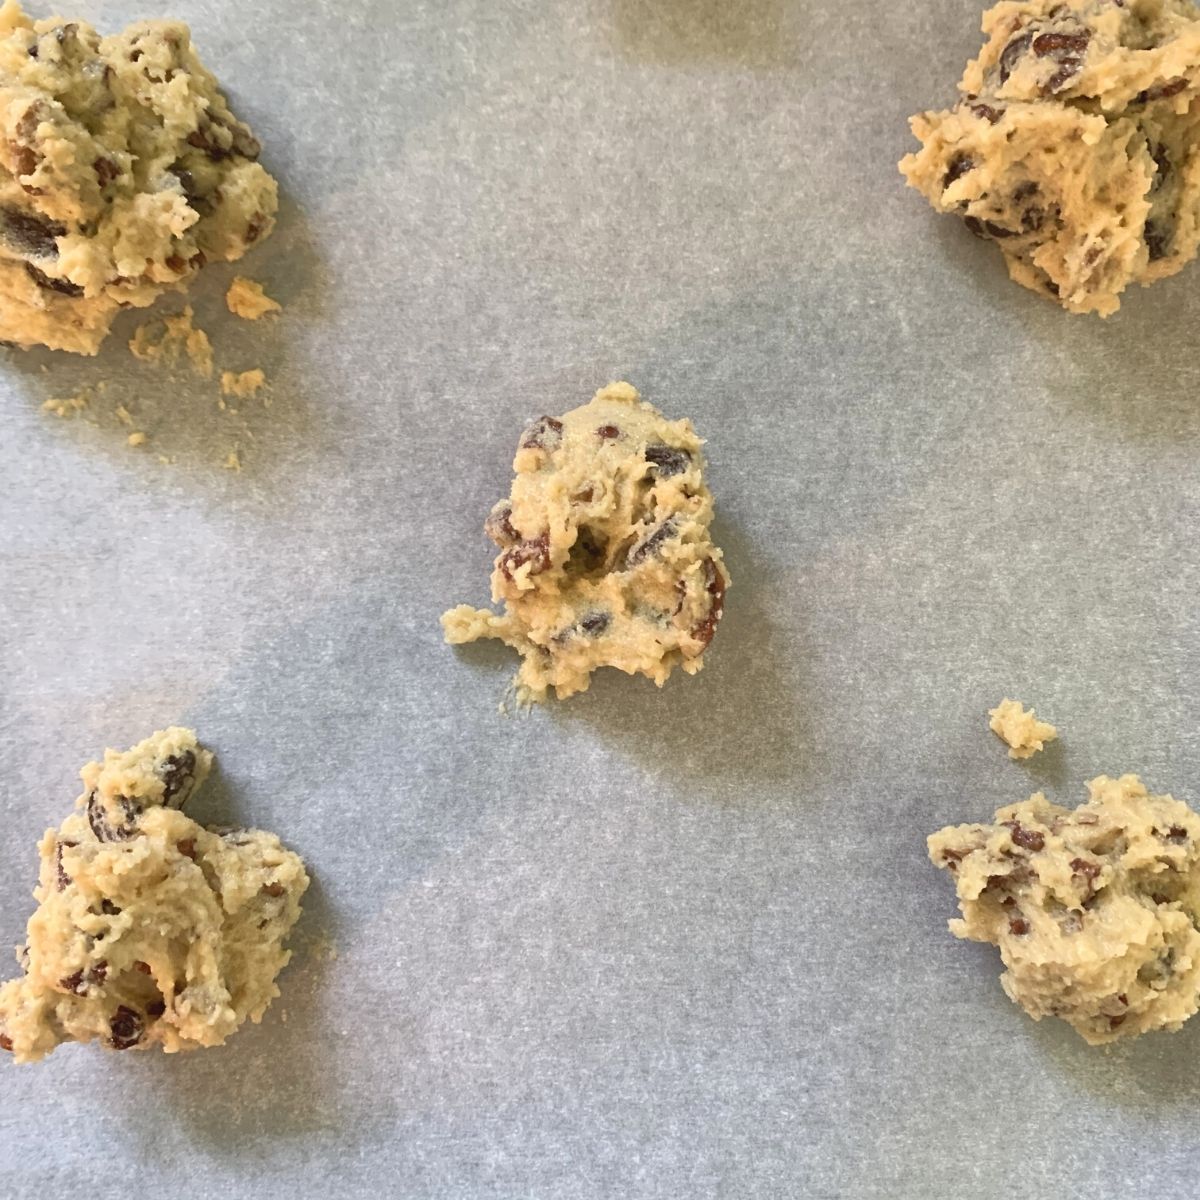 rounded tablespoons of low carb cookie dough on a parchment lined baking sheet before baking